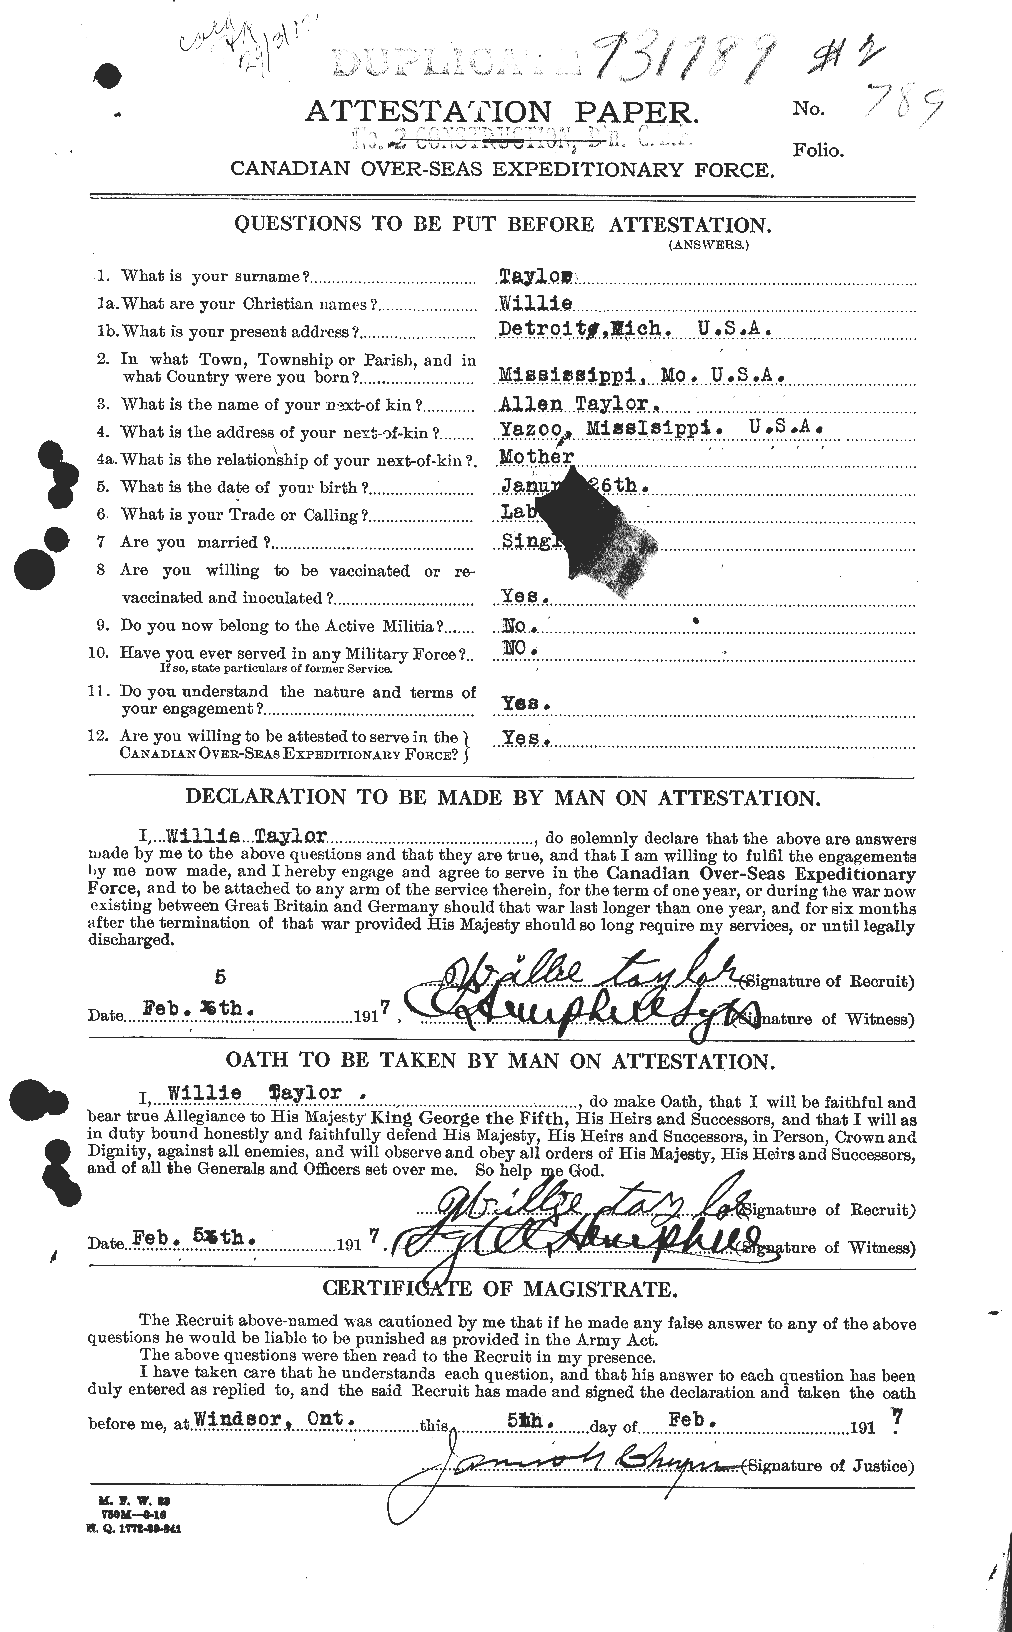 Personnel Records of the First World War - CEF 628369a